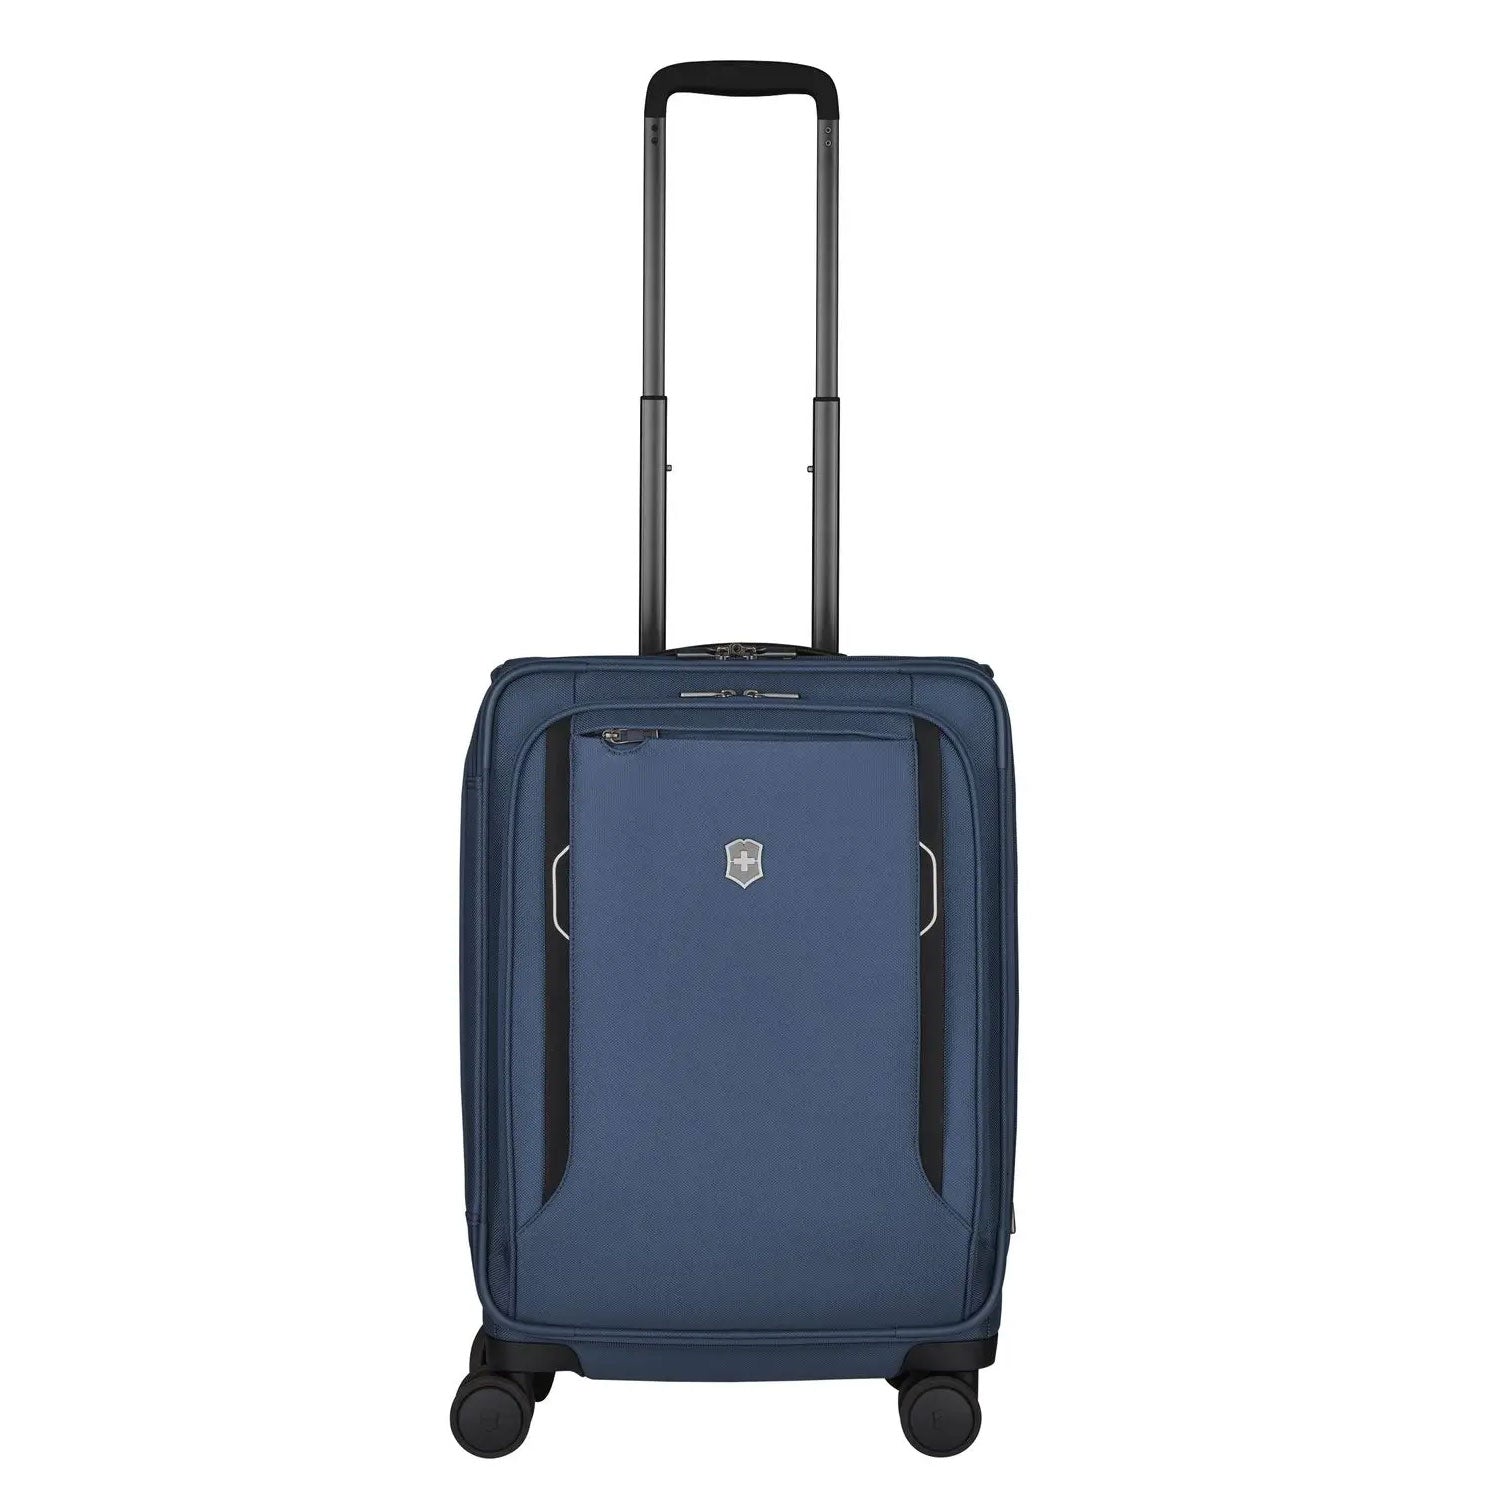 Victorinox Swiss Army Werks Traveler 6.0 Softside Frequent Flyer Plus Carry-On